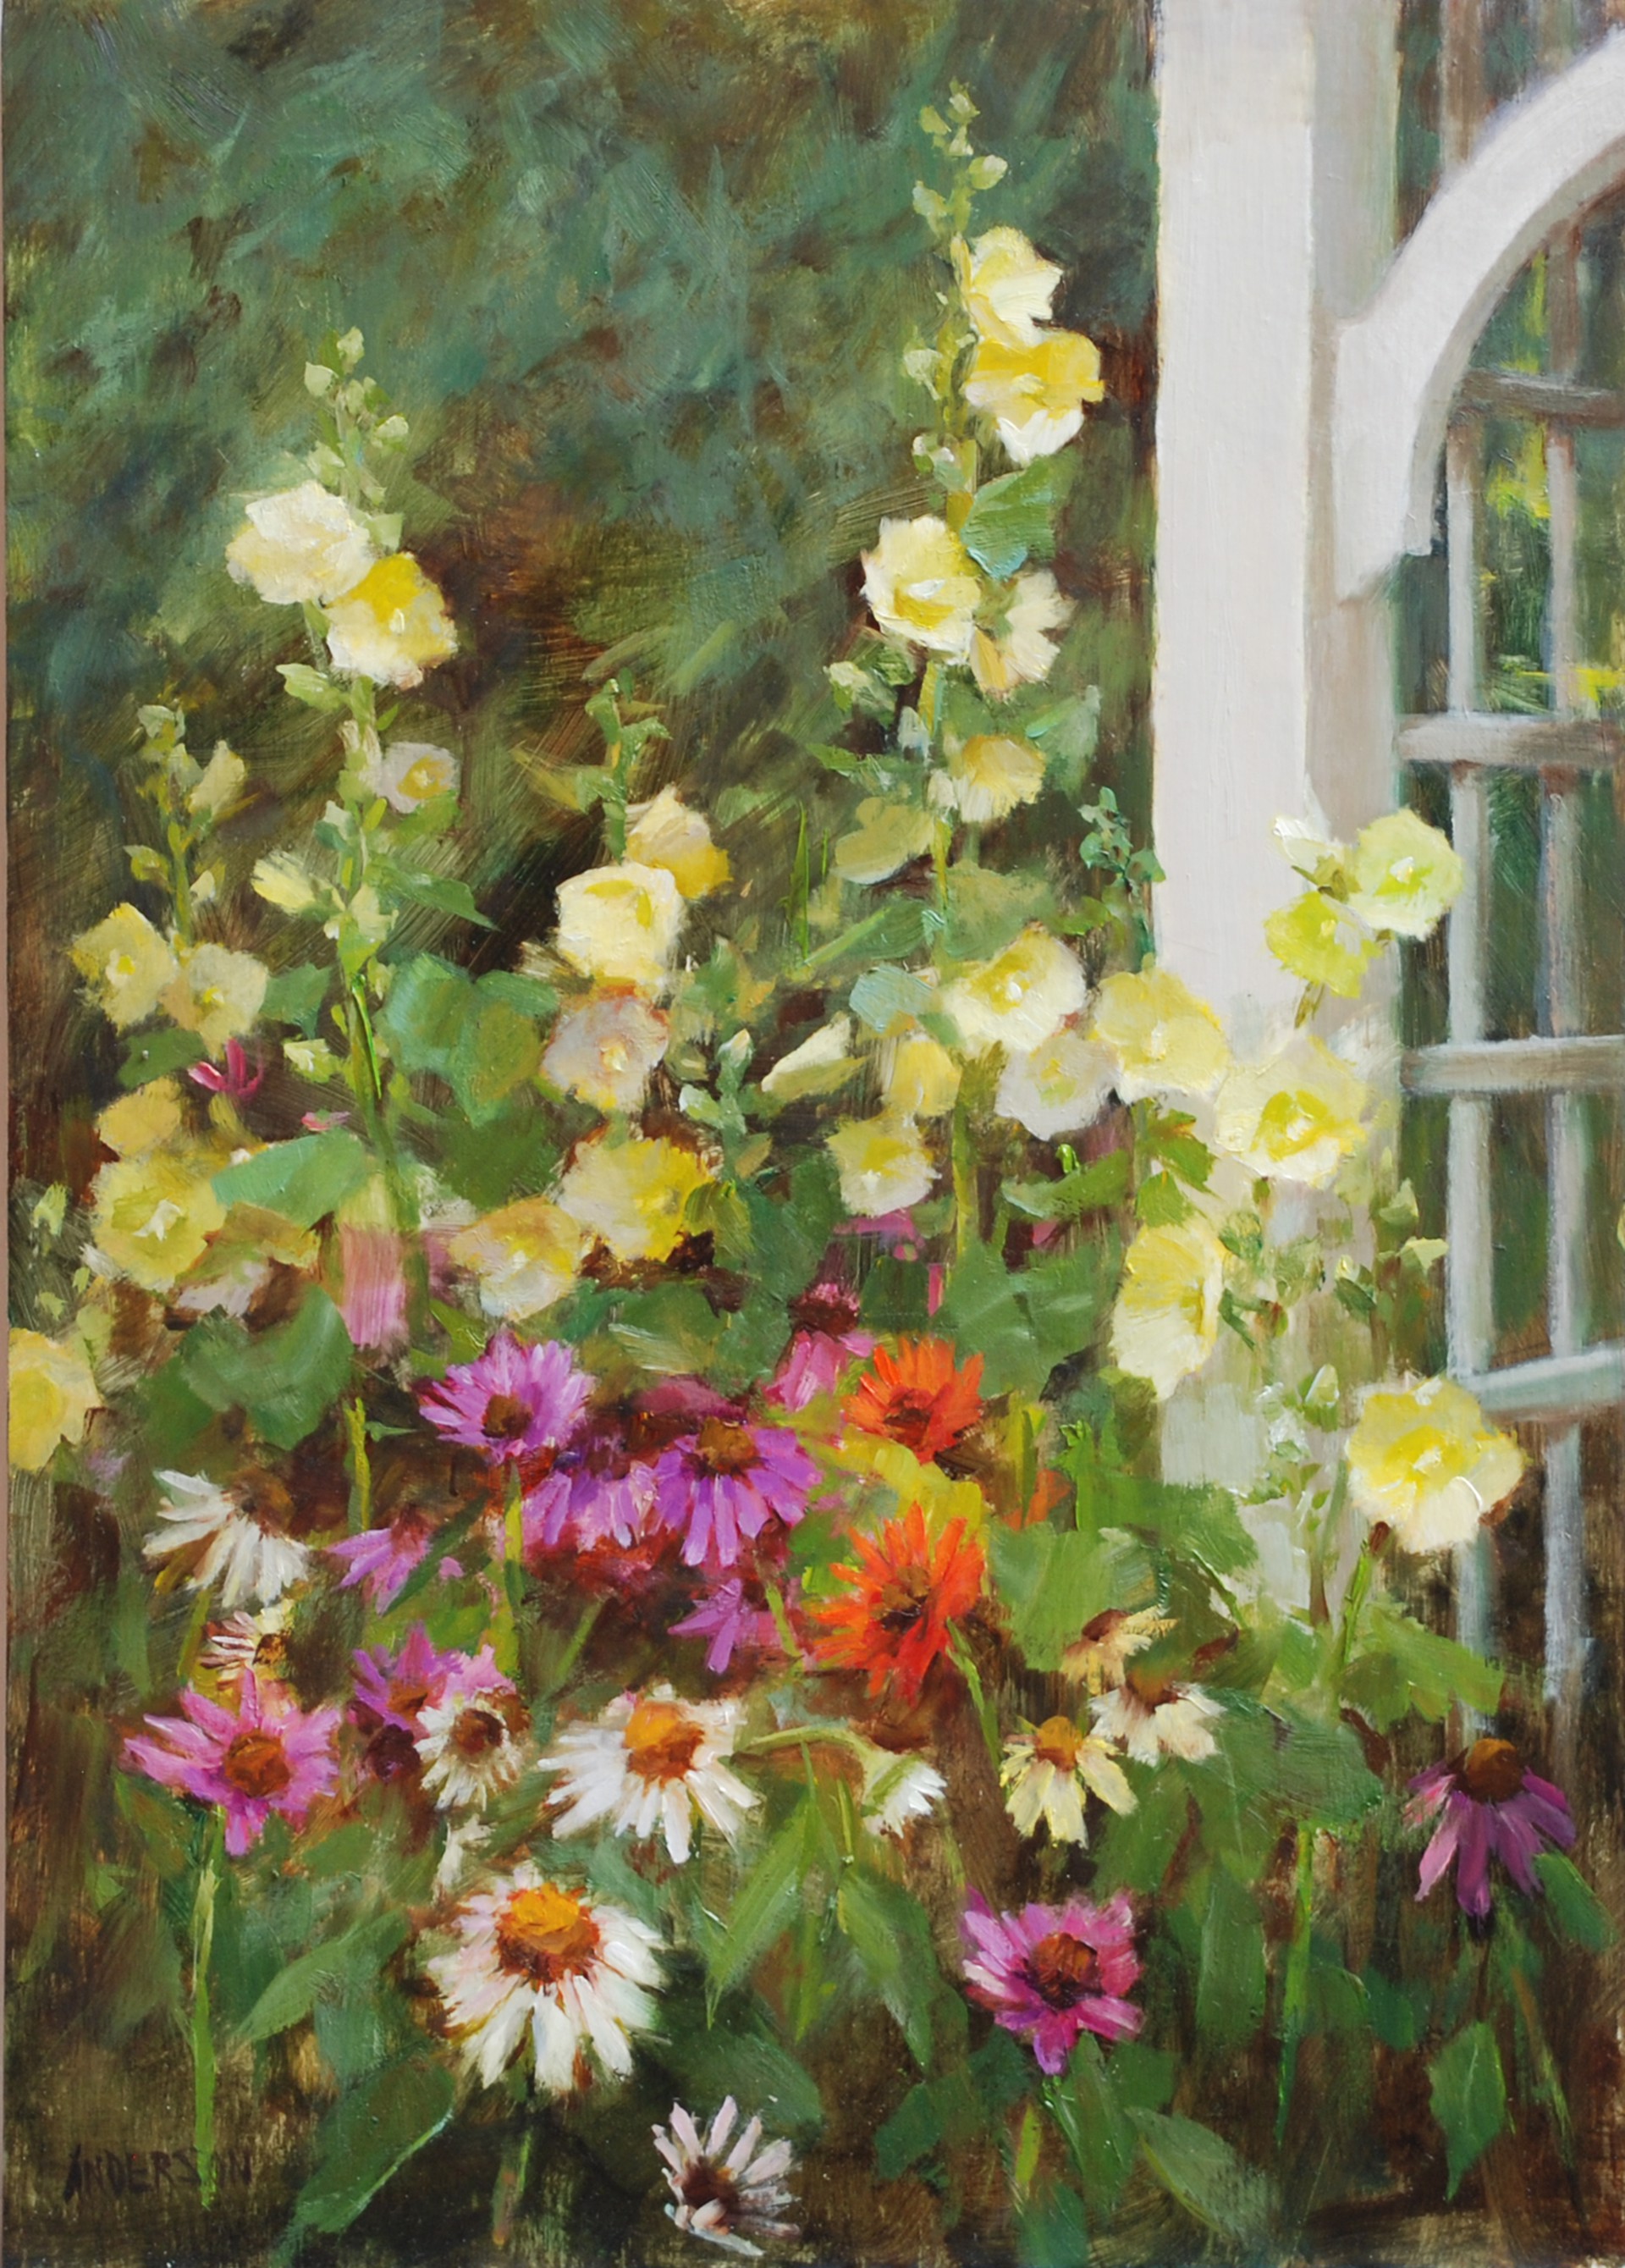 Garden with Yellow Hollyhocks & Coneflowers by Kathy Anderson